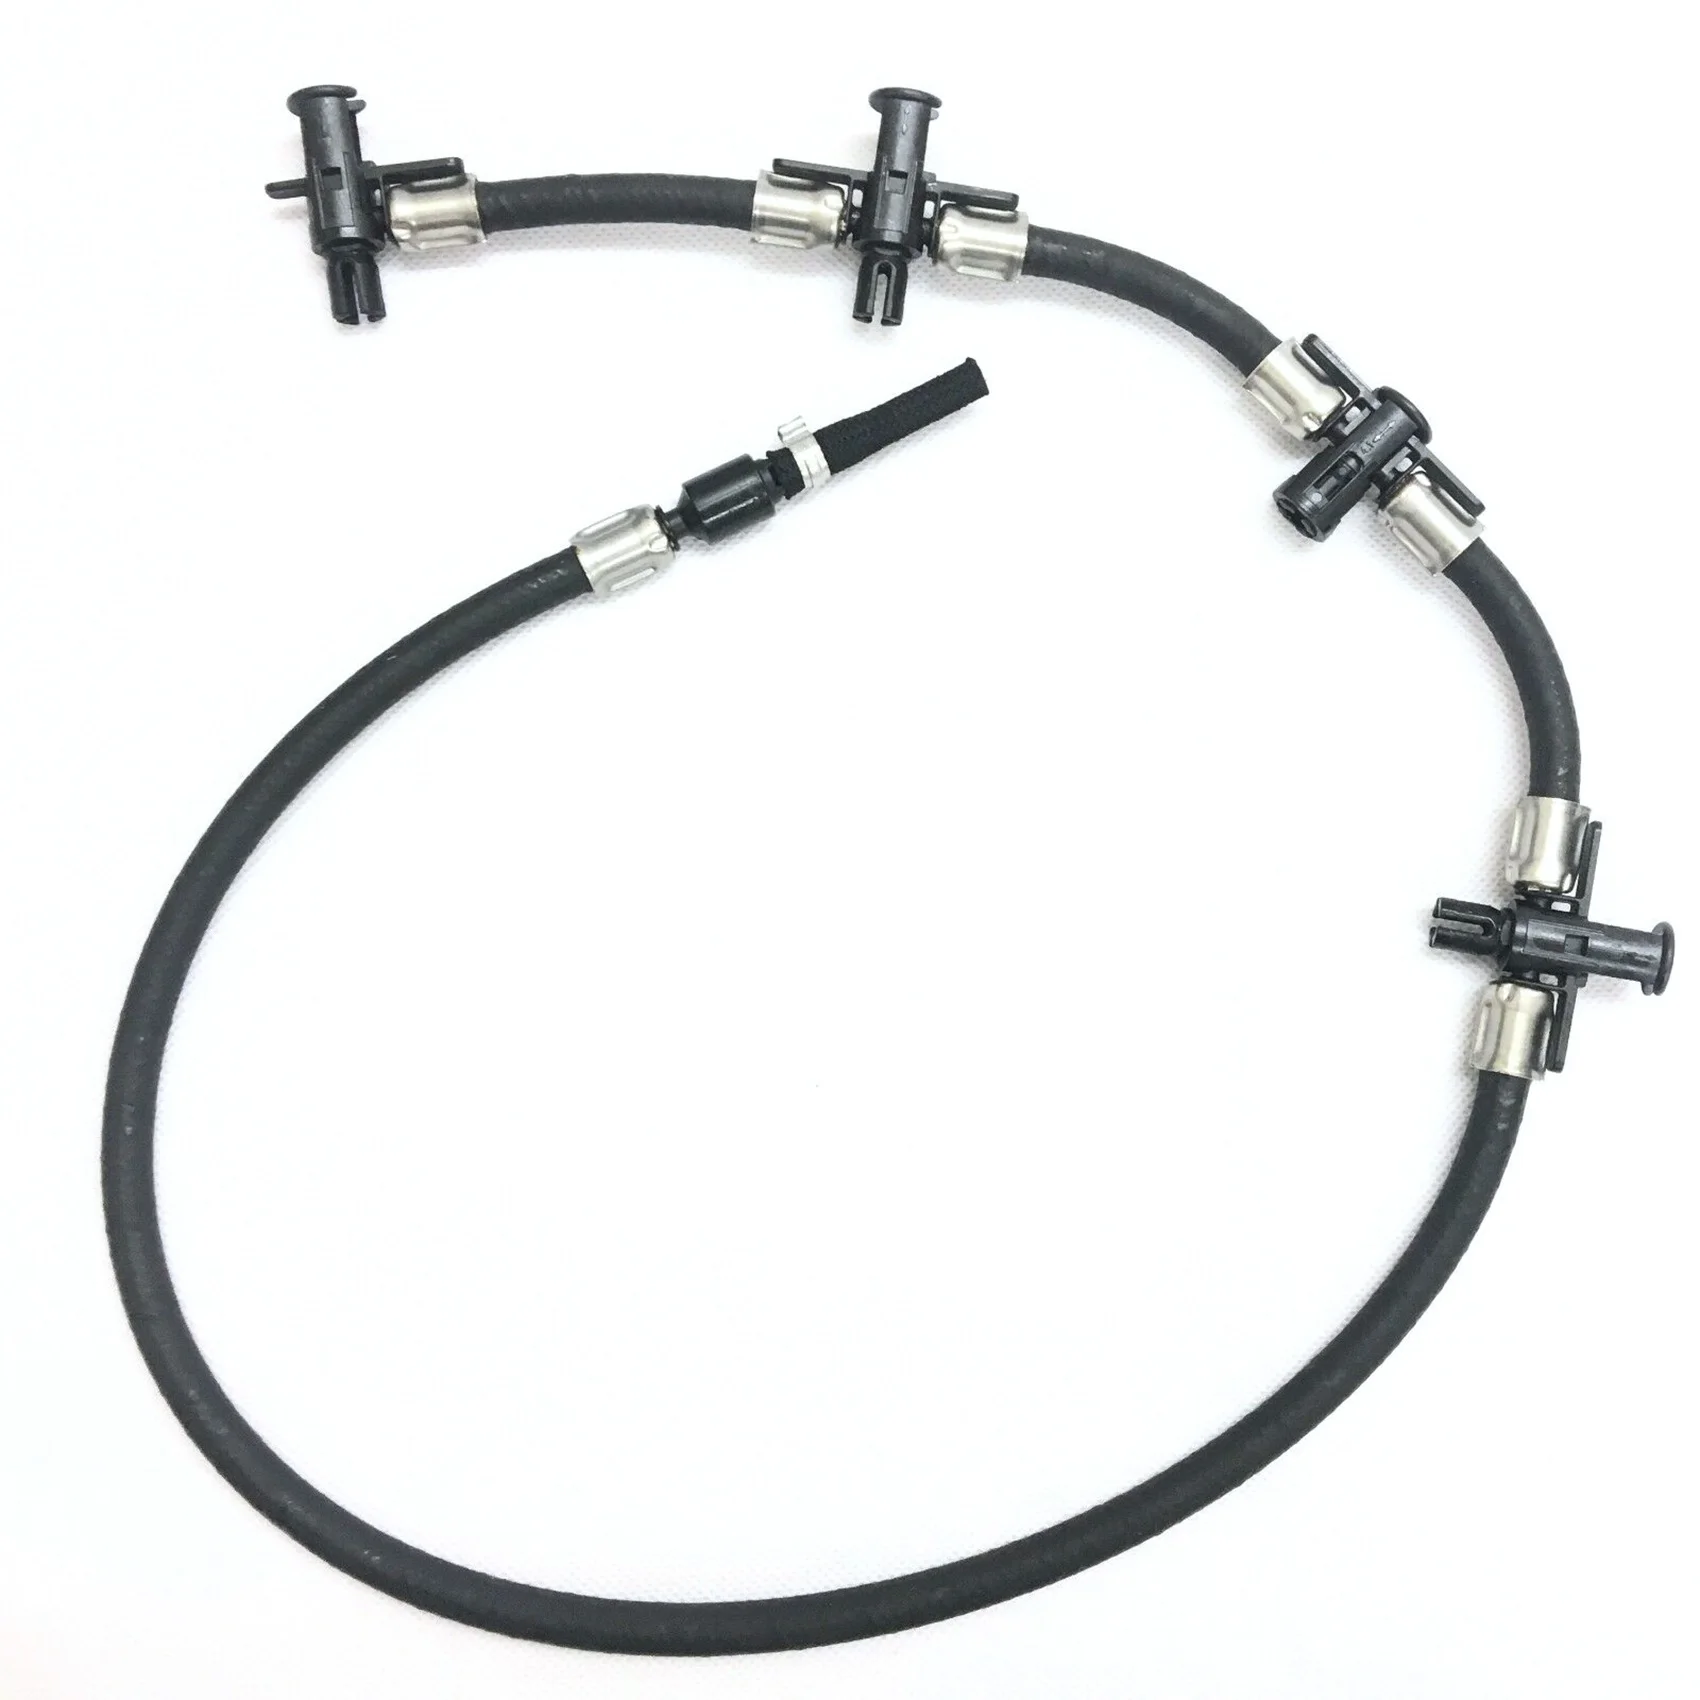 

A6460700932 6460700932 Fits for Mercedes Sprinter 2.2 CDI Fuel Leak Off Pipe Fuel Tank Line Hose Pipe Injector Hose